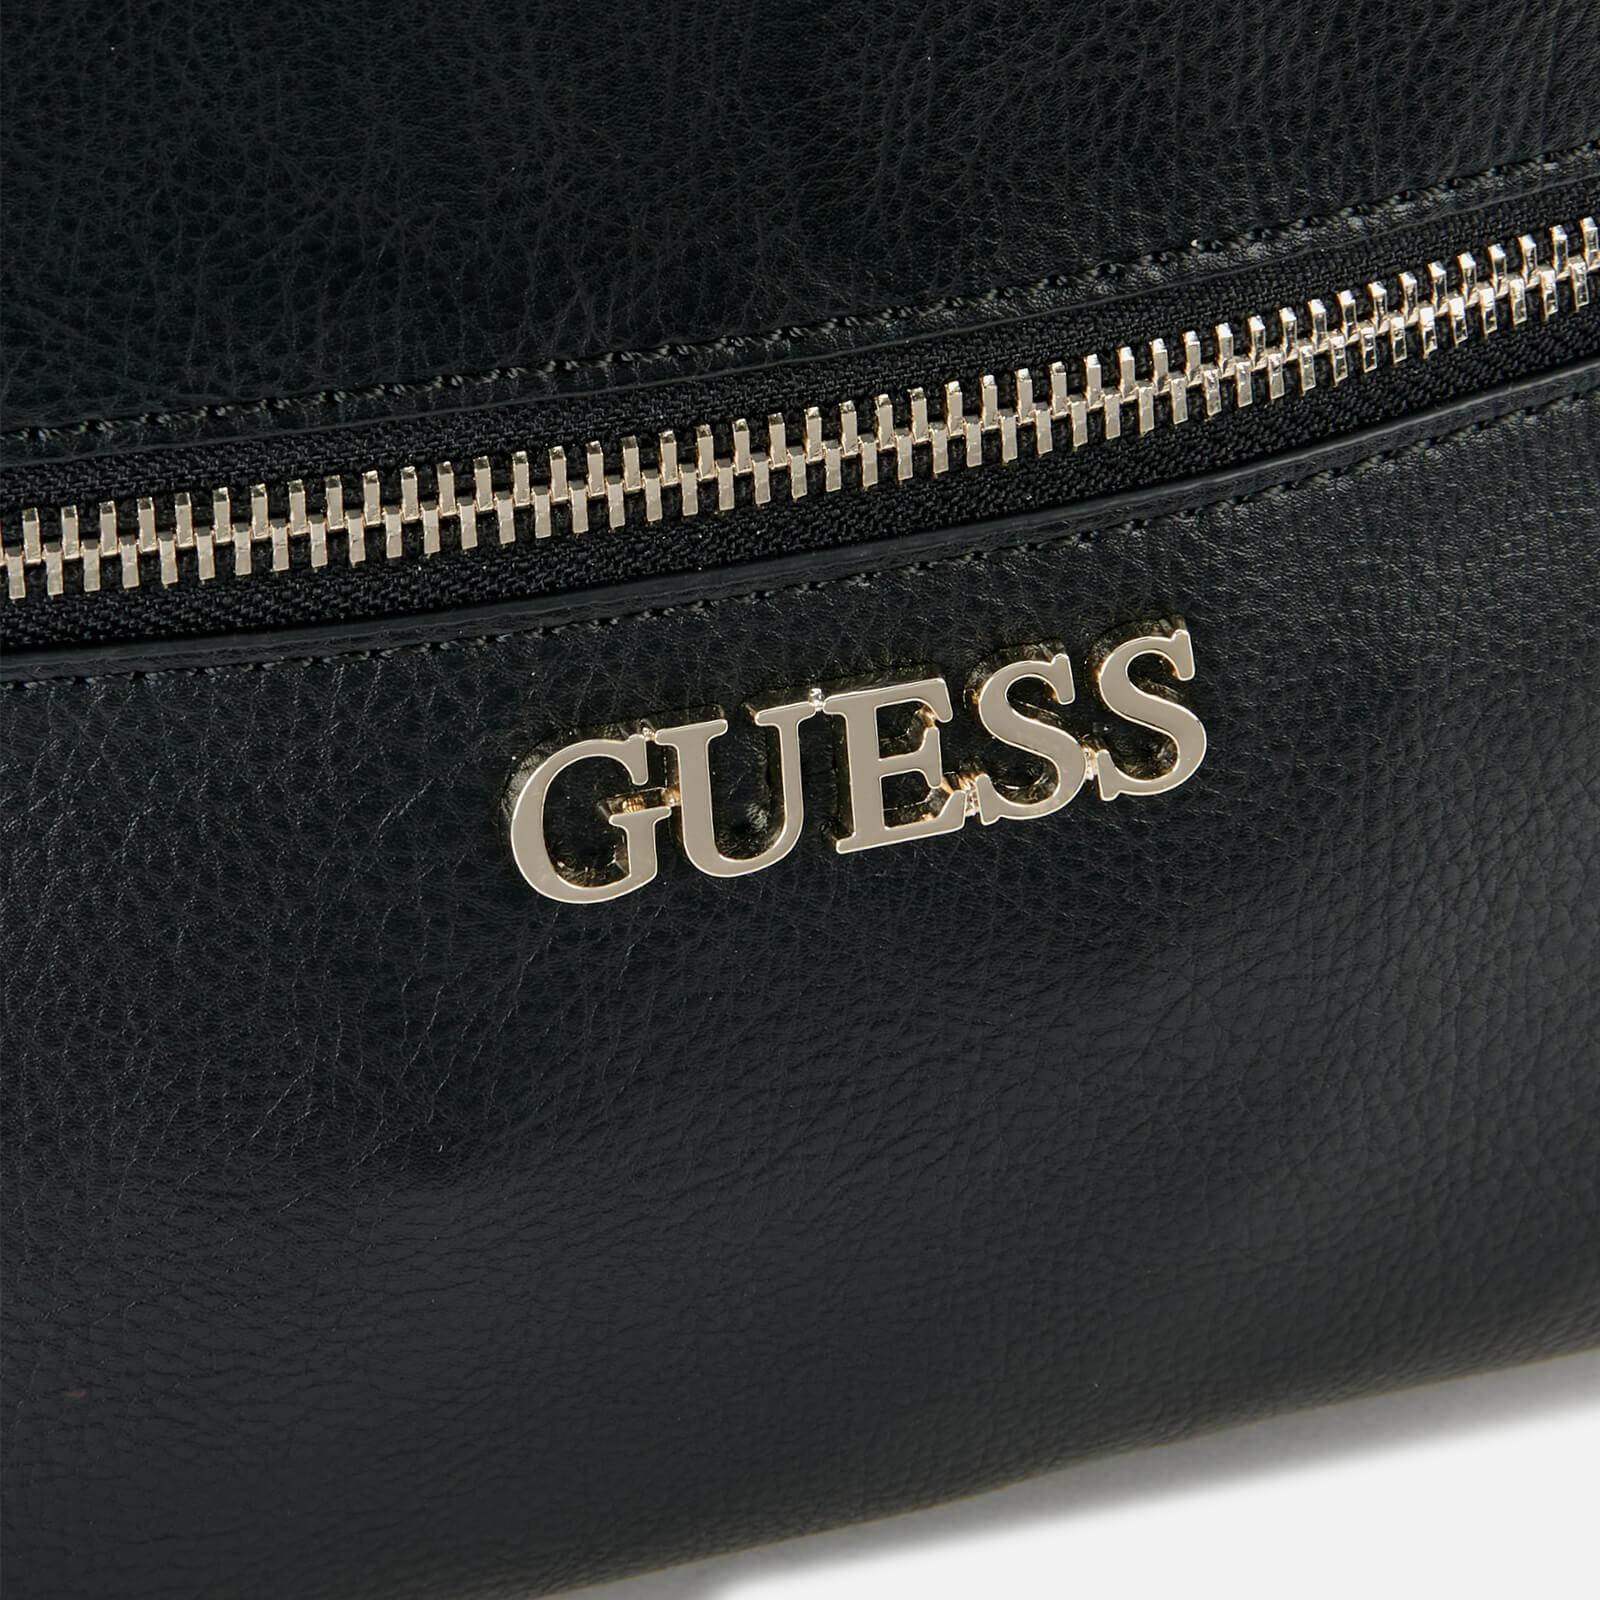 Guess Manhattan Backpack in Black | Lyst